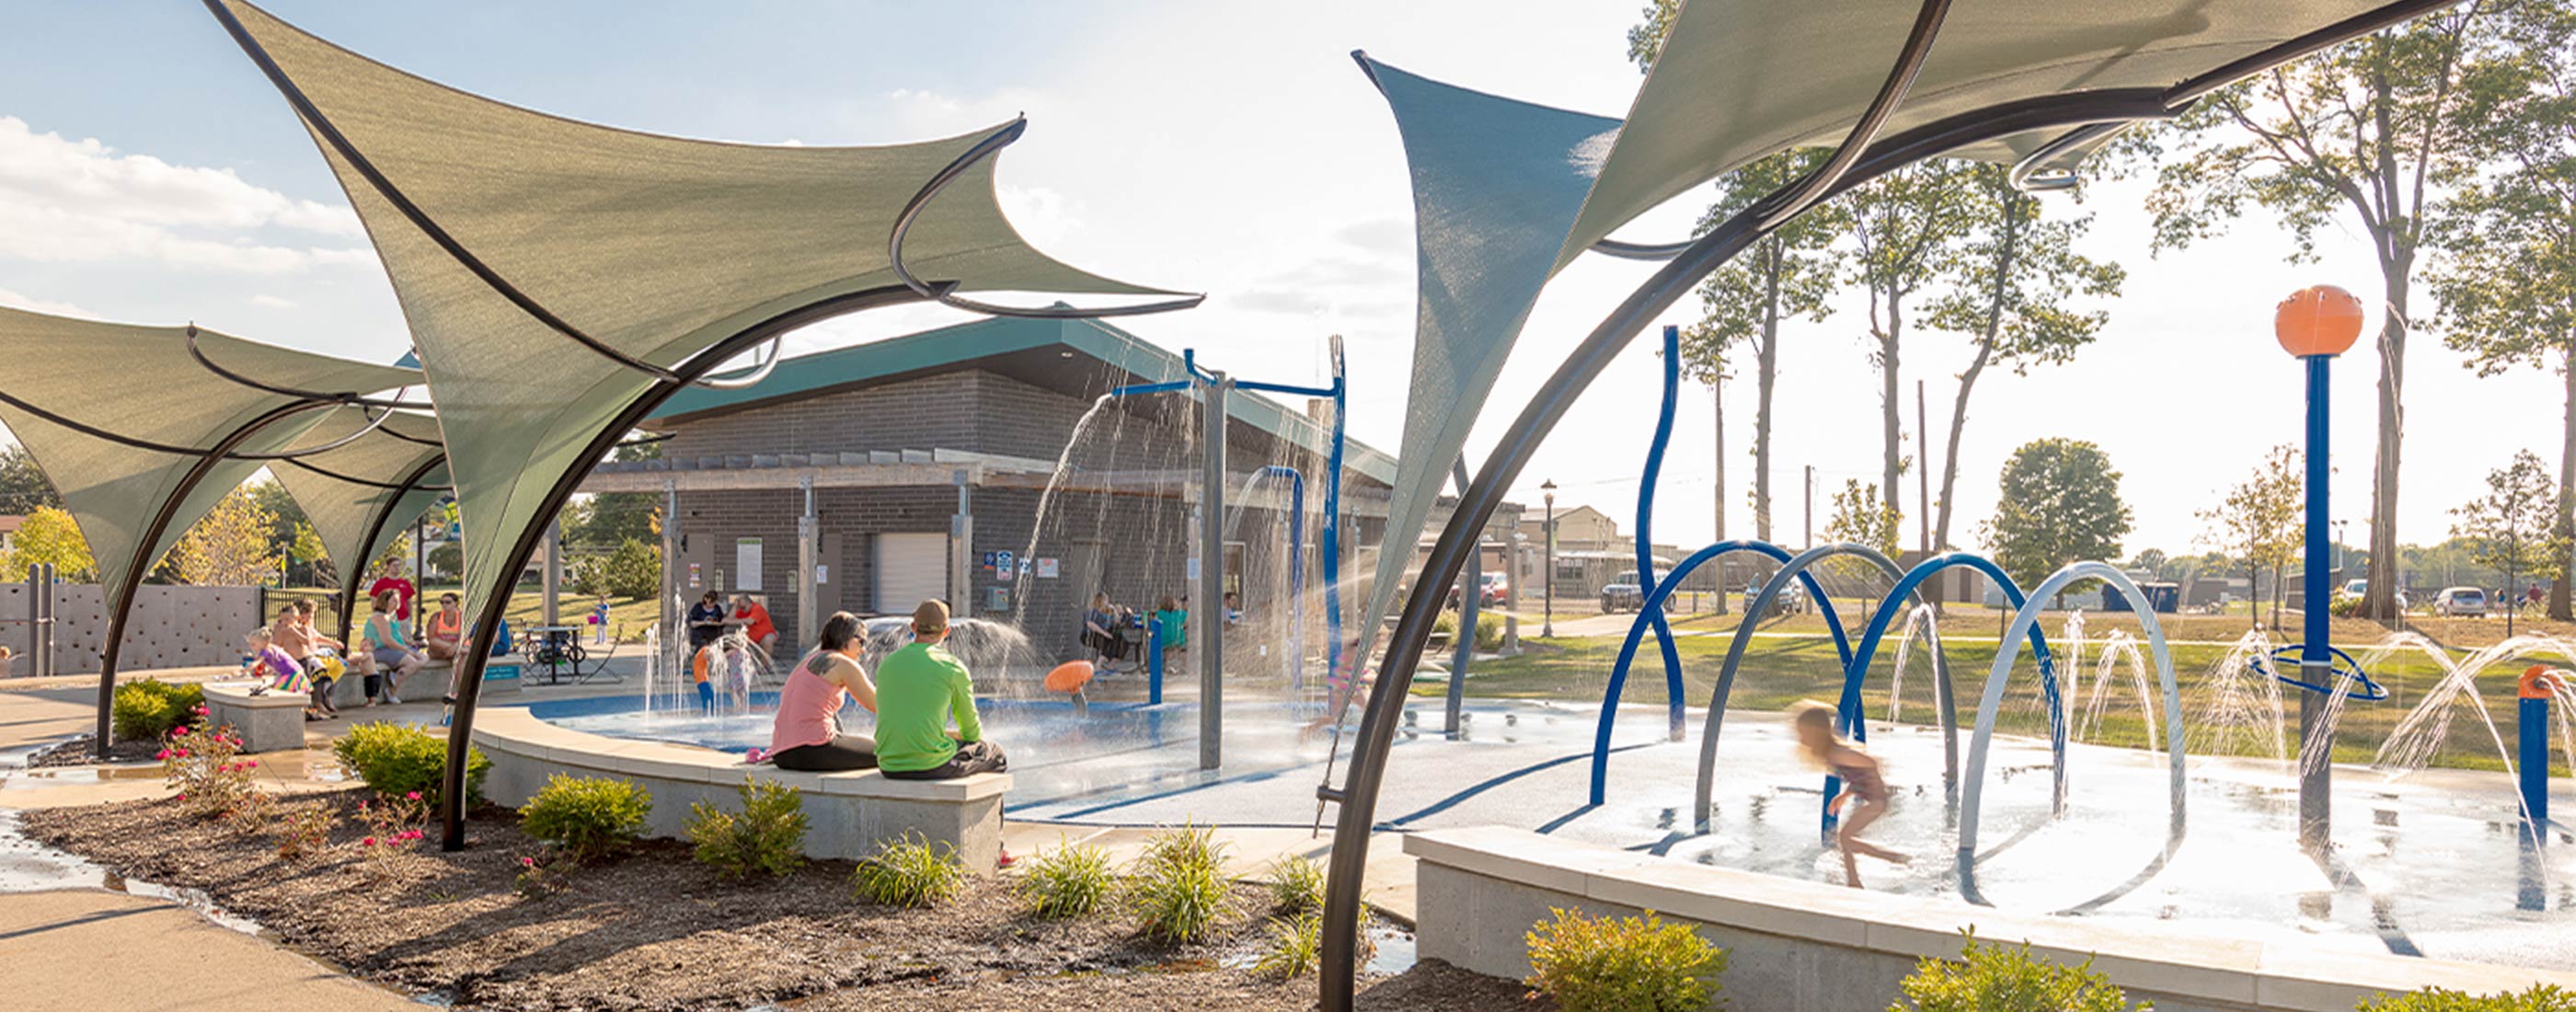 The City of Green Central Park includes a splash pad with multiple play zones.